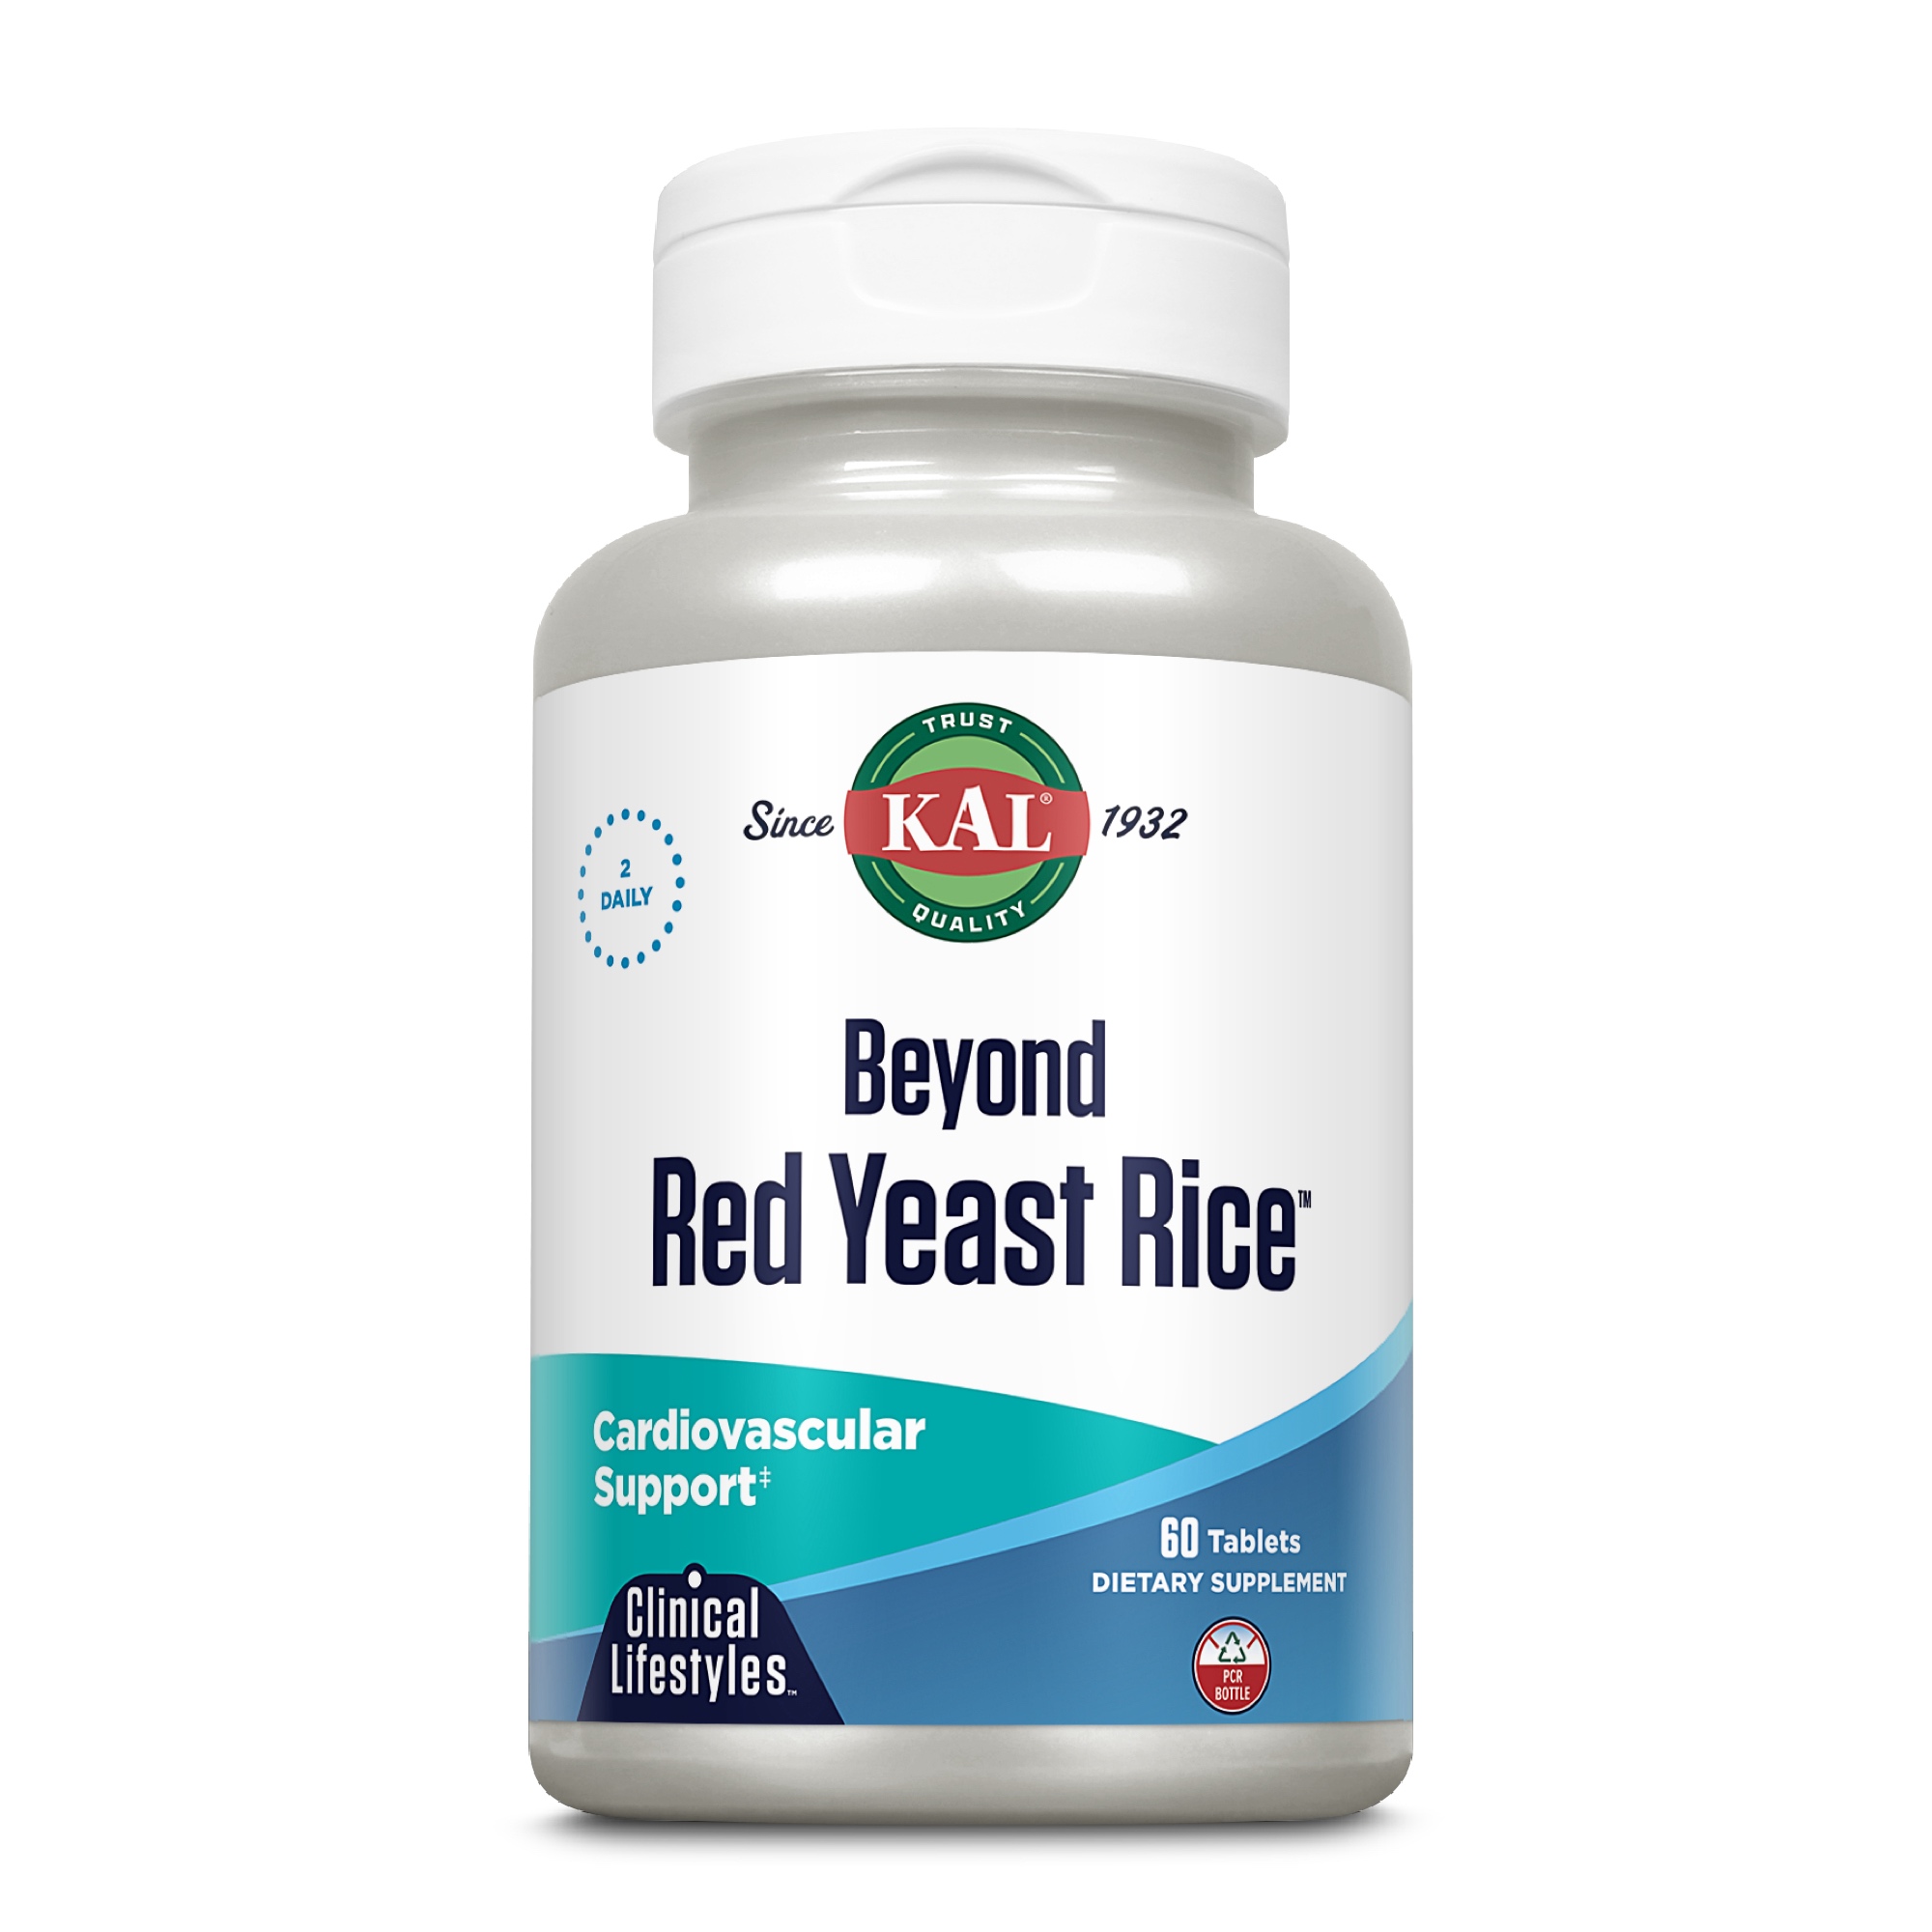 Beyond Red Yeast Rice